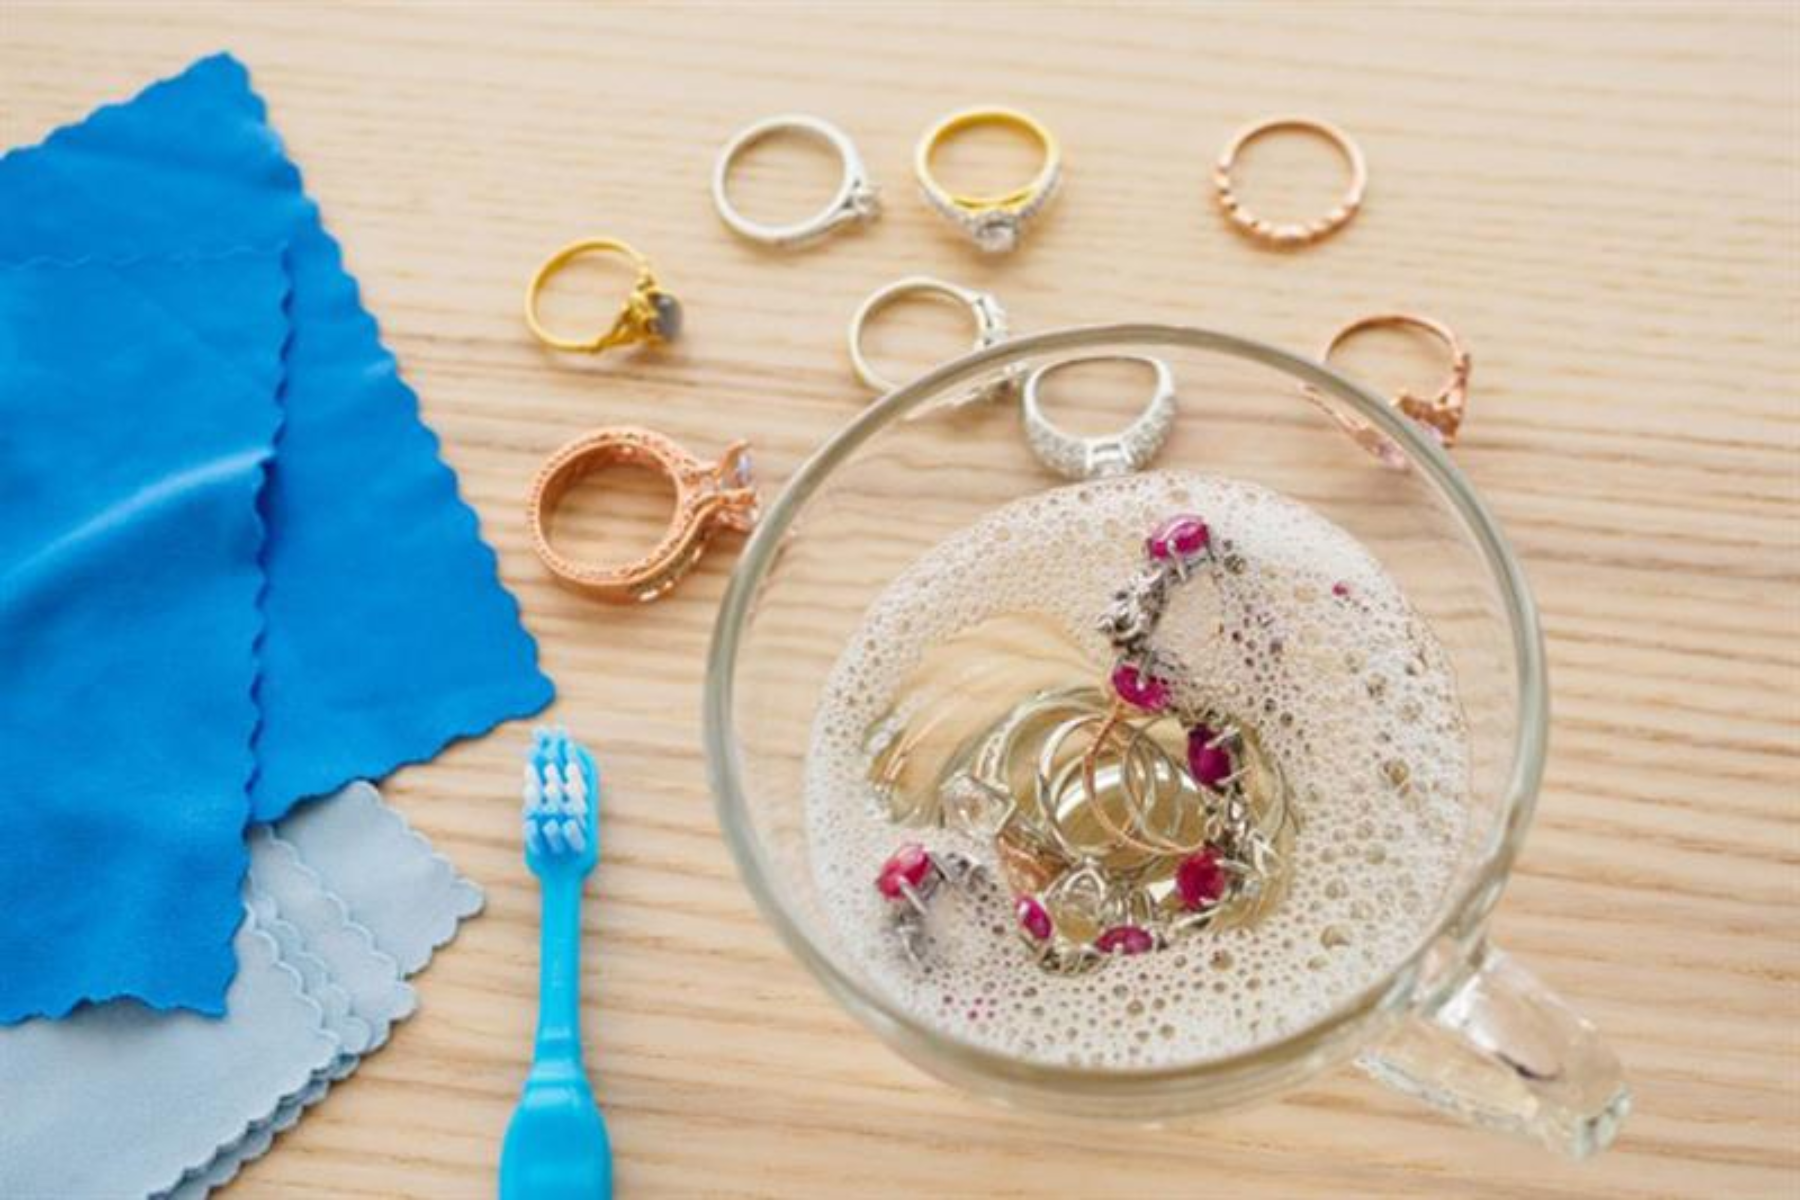 Cleaning Jewelry At Home